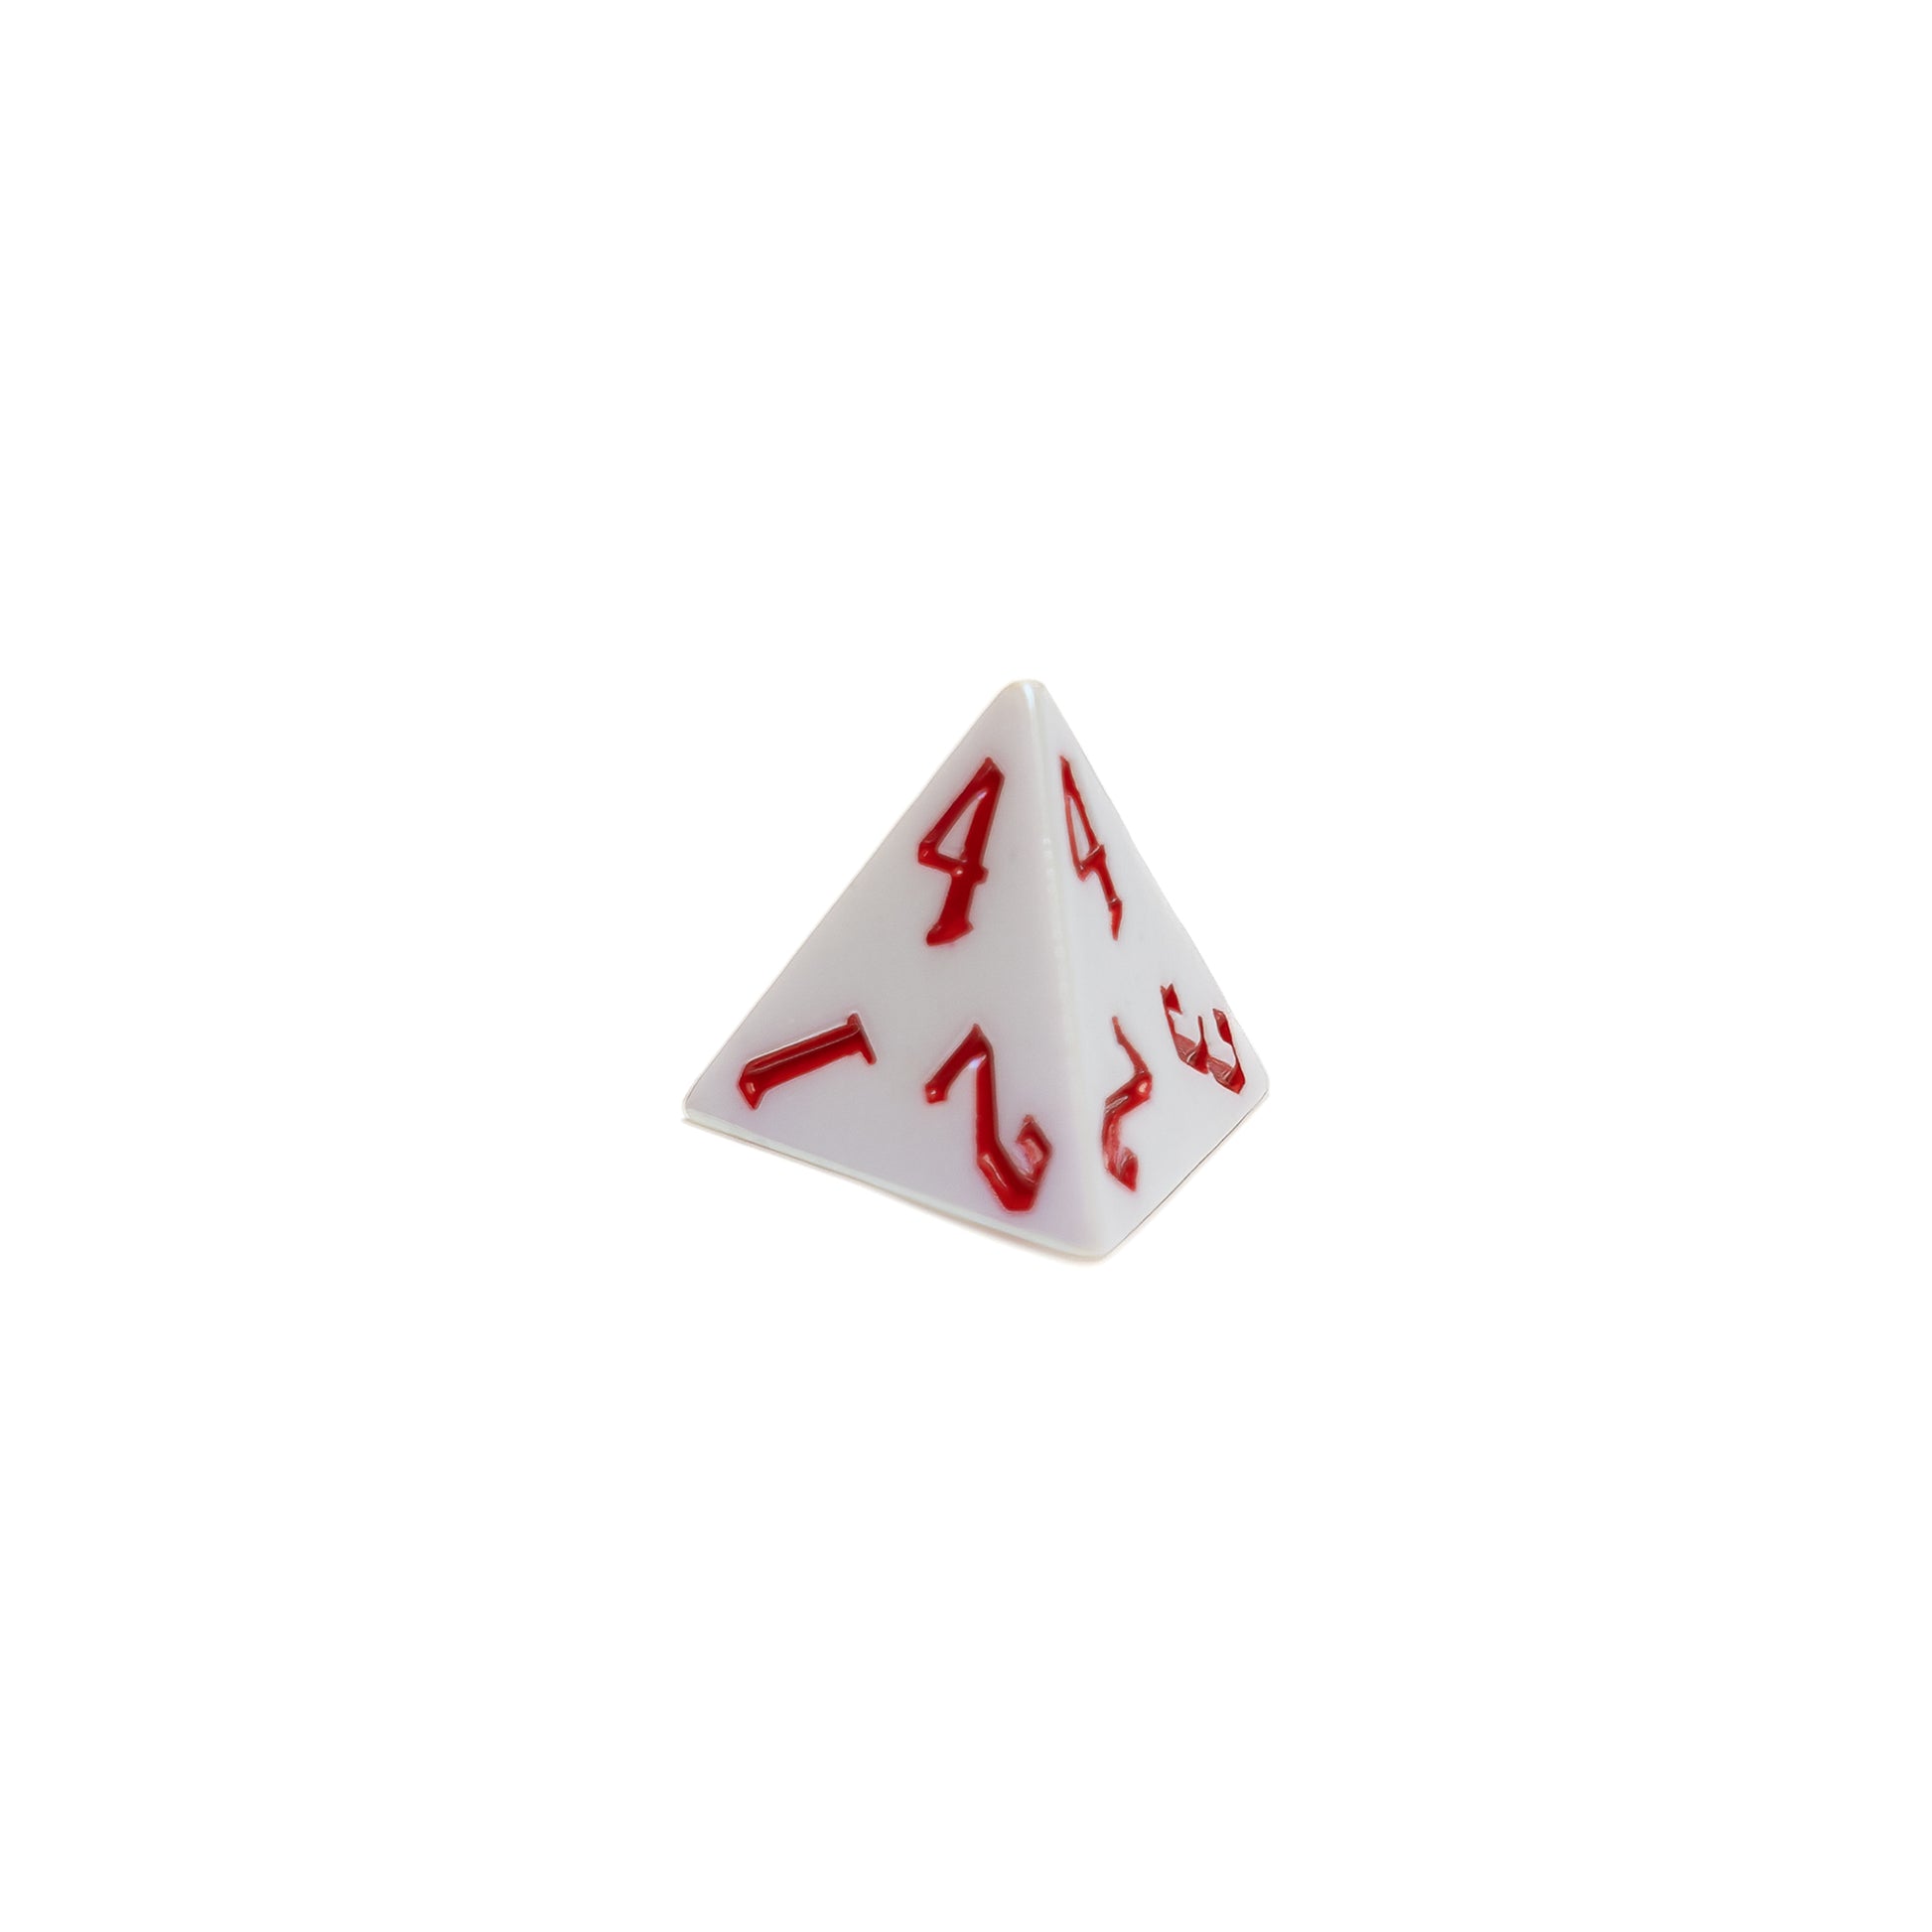 Roll Britannia Royal Guard Sharp Edged Electroplating Dungeons and Dragons D4 Dice with Red and White Aesthetic